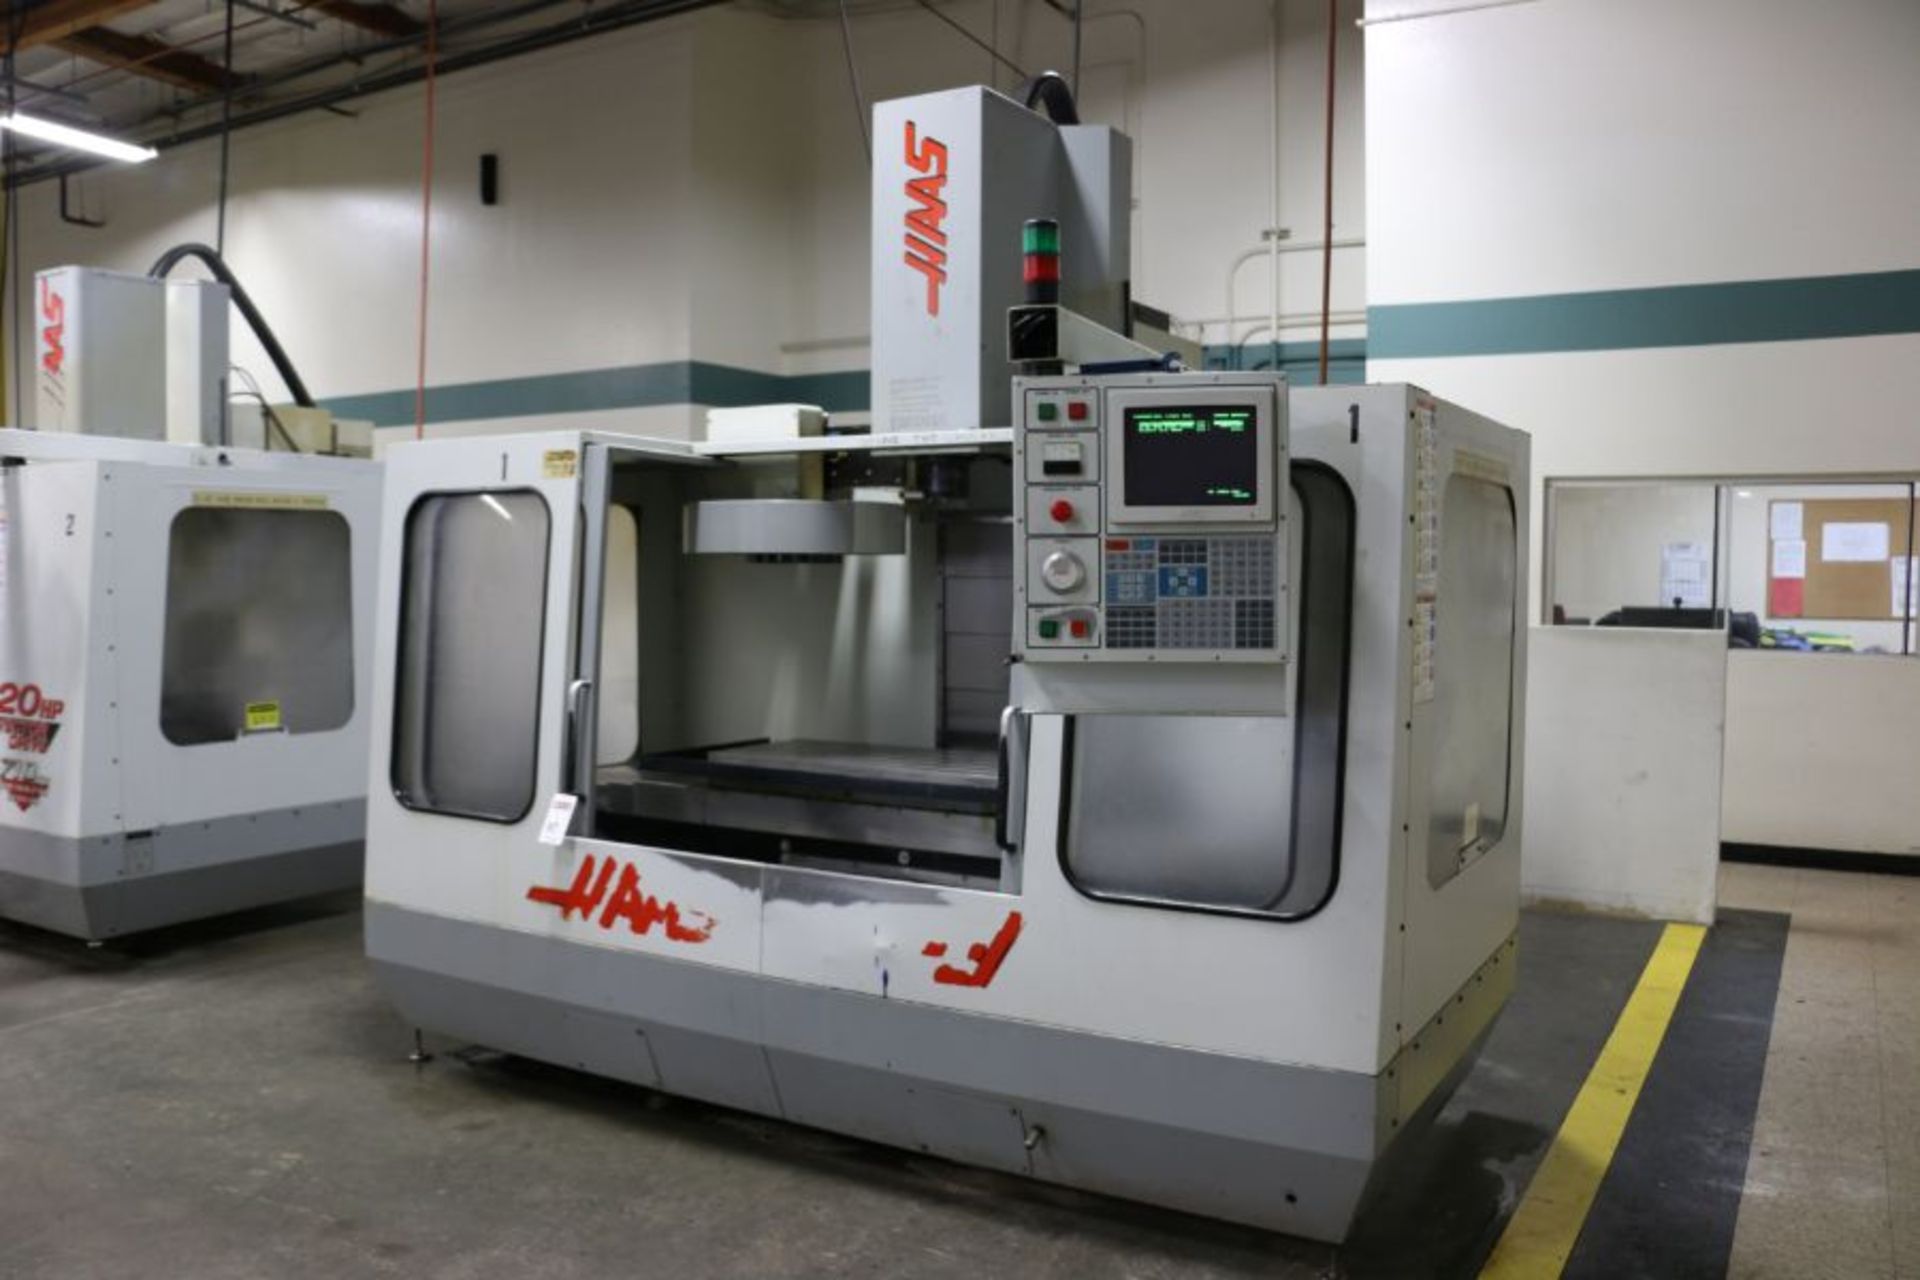 Haas VF-3, 40"x20"x20" Travels, 20 Position Tool Carousel, CT-40 Taper, s/n 4311, New 1995 - Image 5 of 11